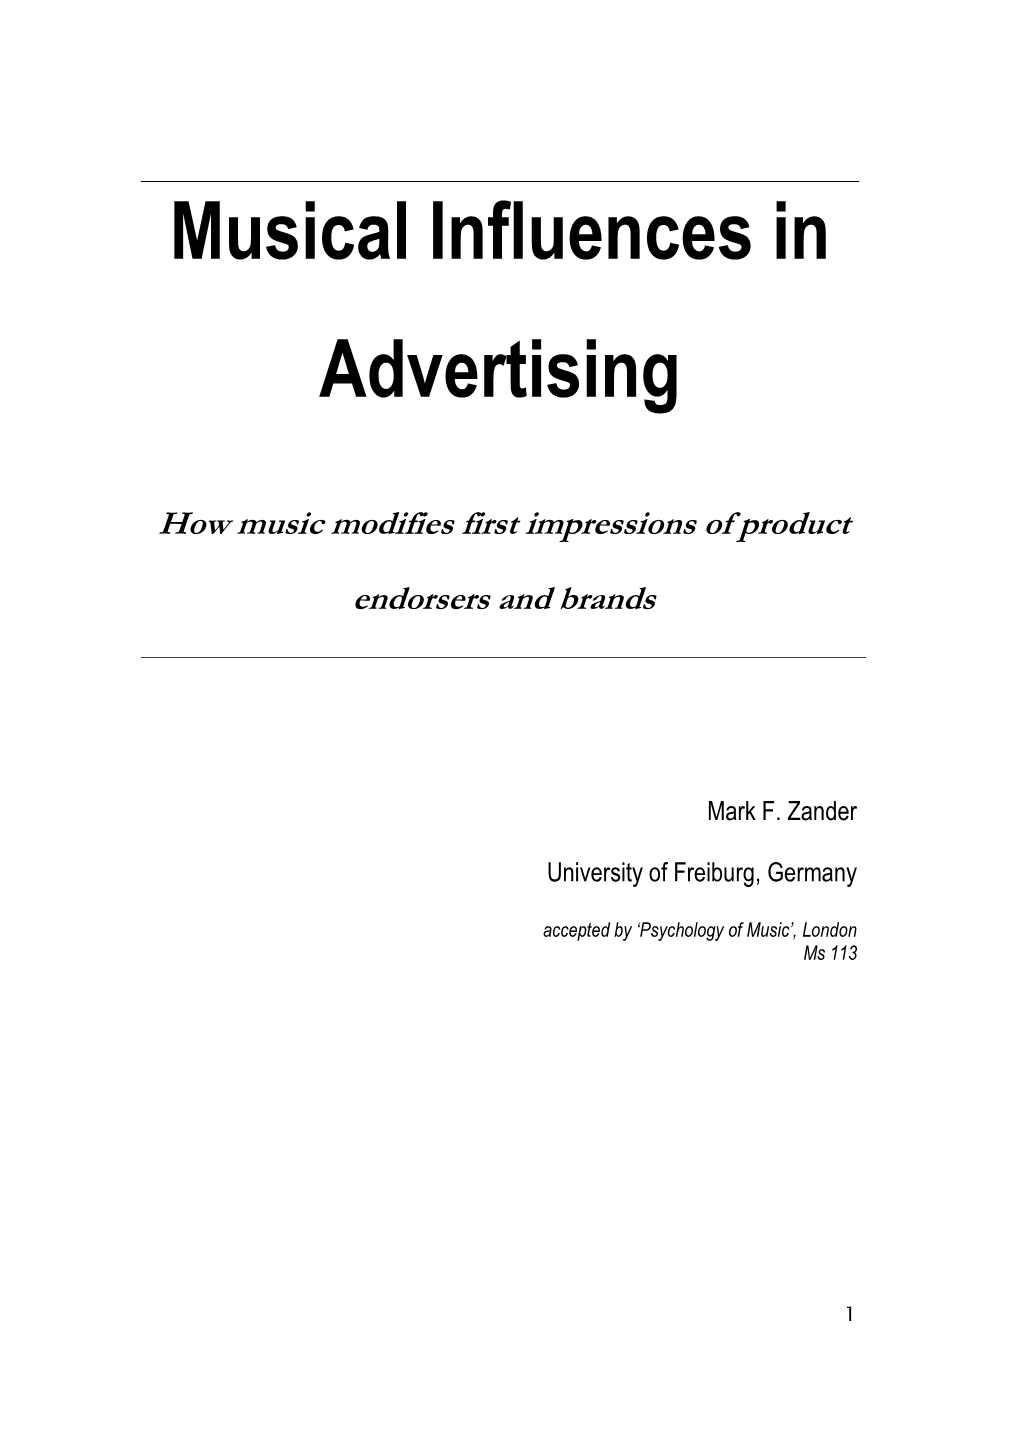 Musical Influences in Advertising